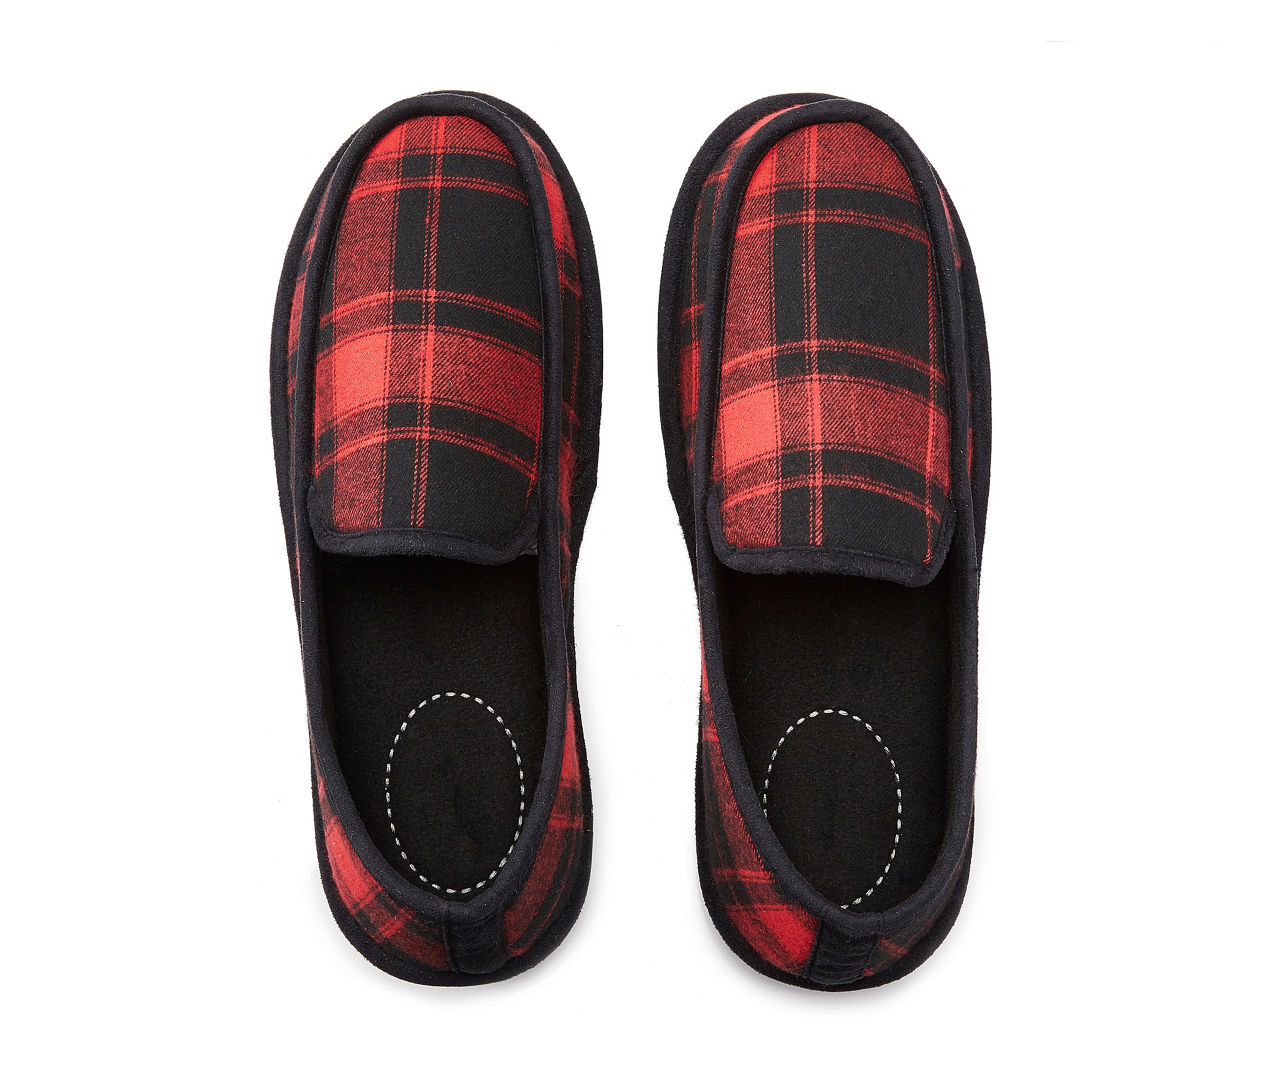 Men's Black & Red Plaid Moccasin Slippers, Size M